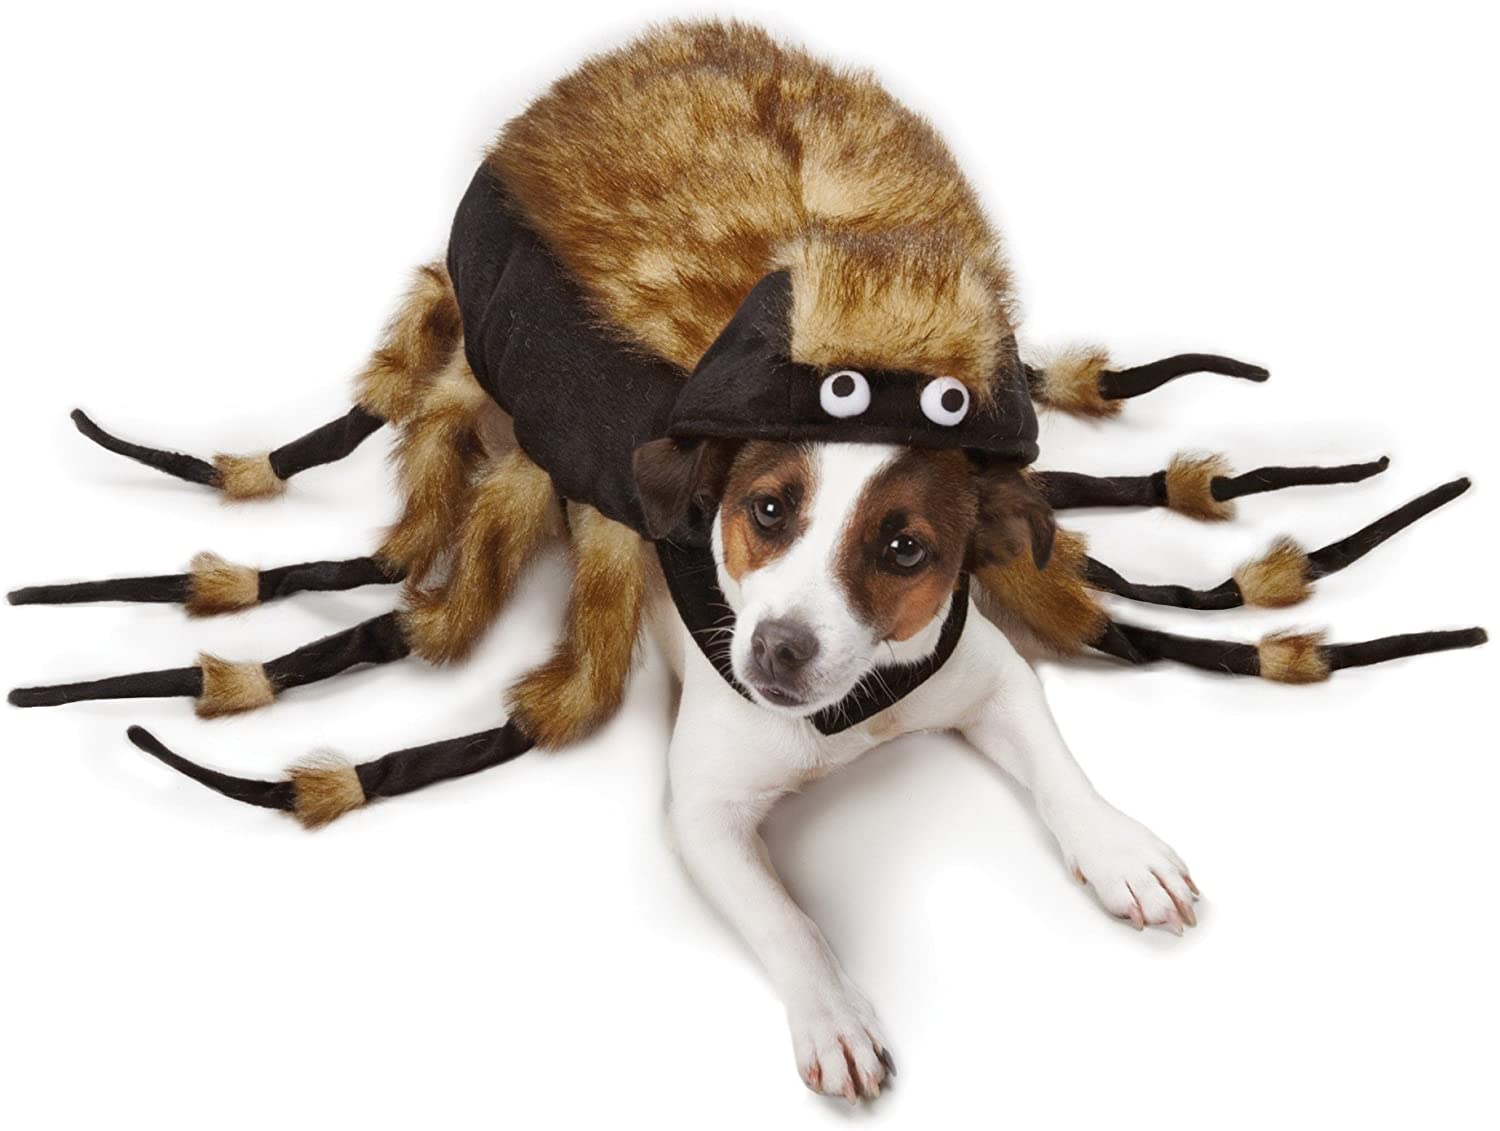 Tarantula Dog Costume Turns Your Dog Into a Giant Spider For Halloween